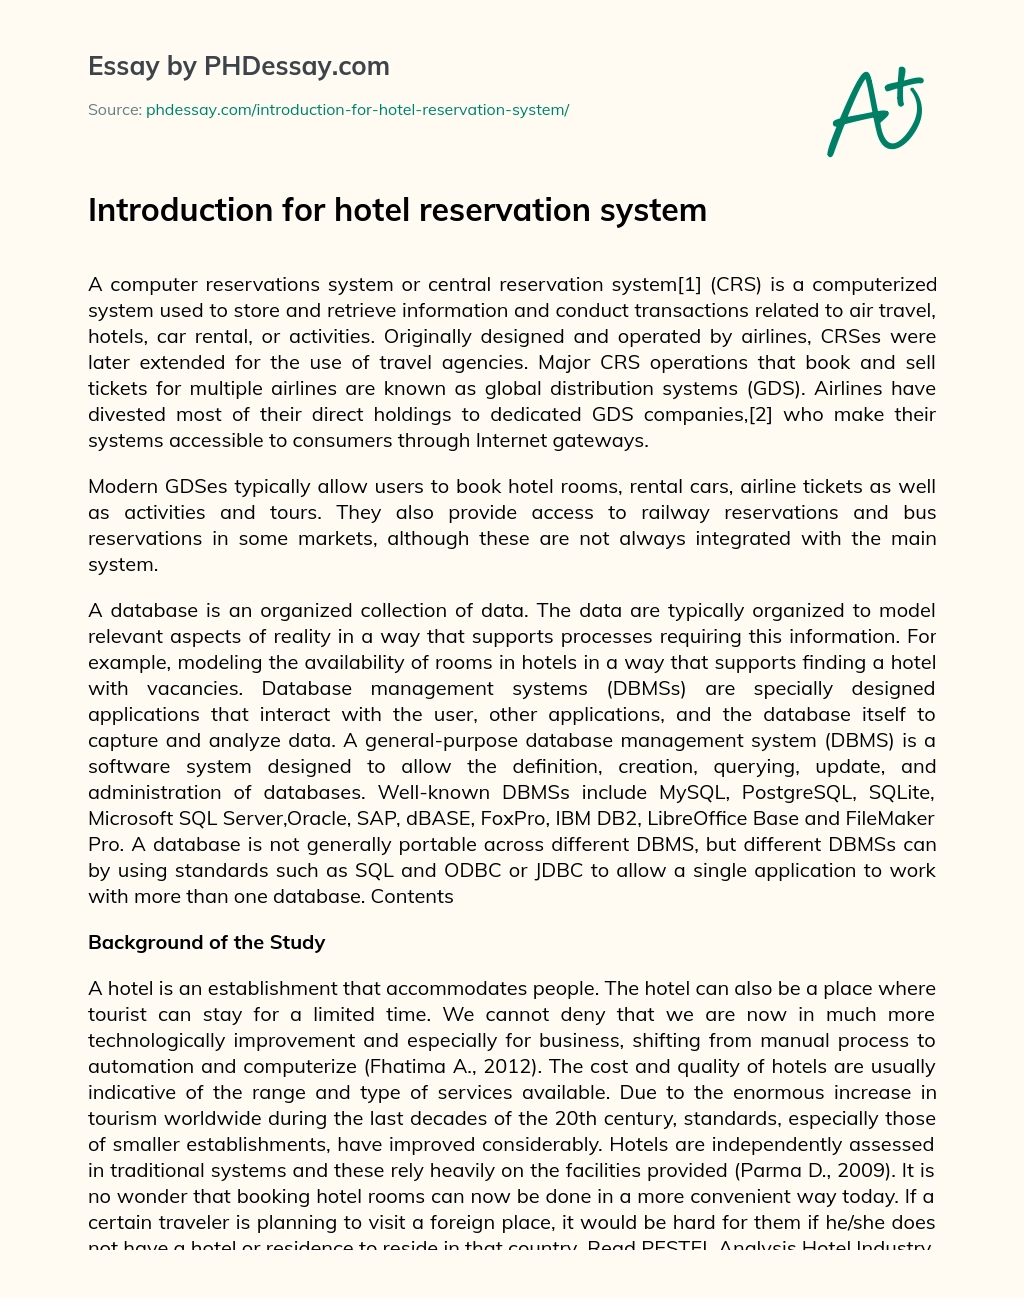 Introduction for Hotel Reservation System essay